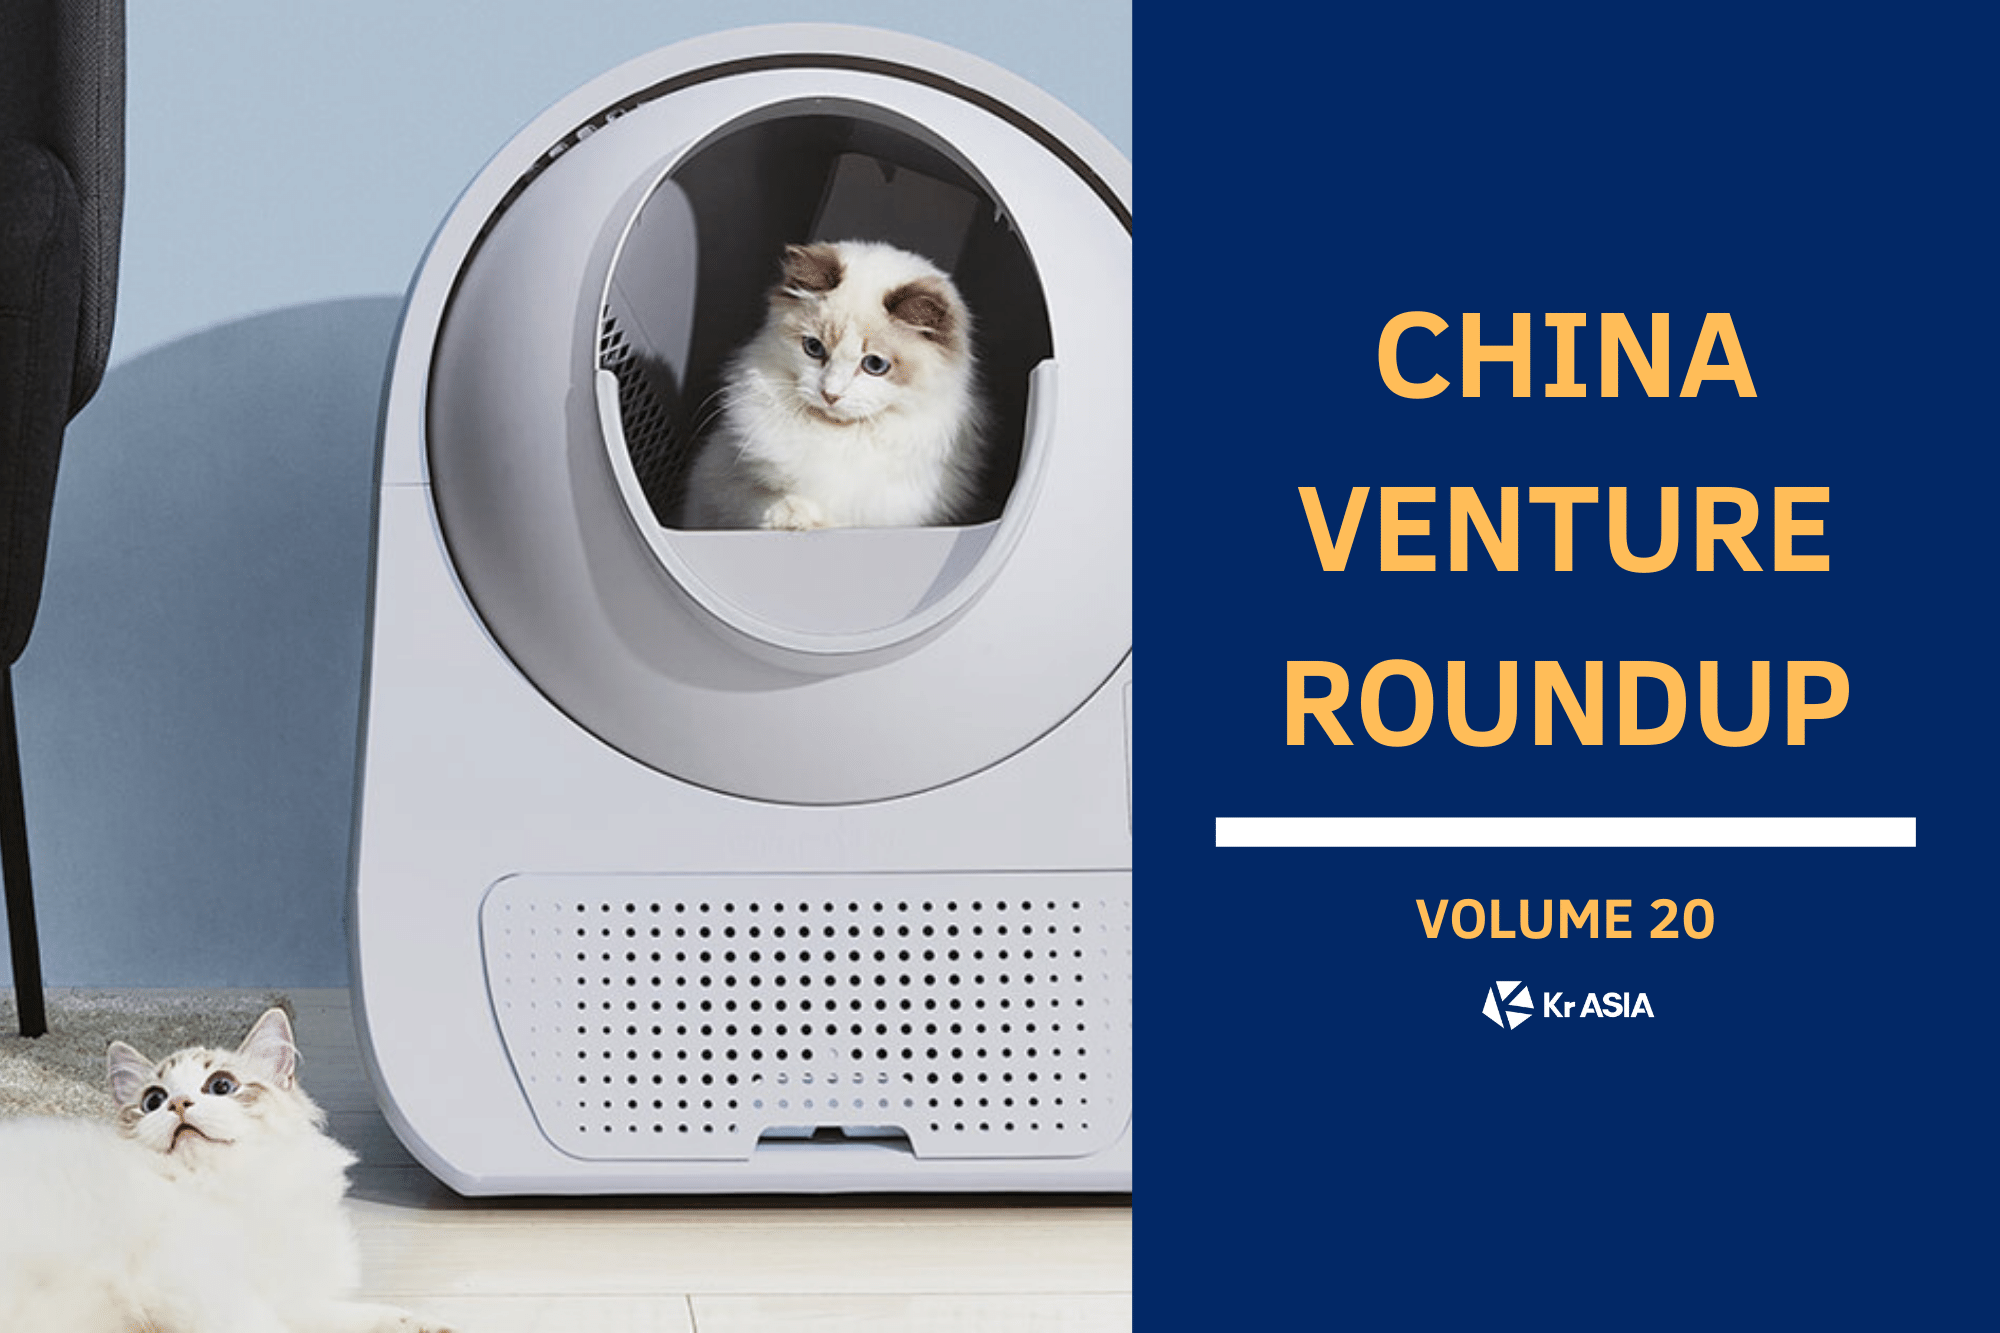 Biotech company pursues triple listing on leading stock exchanges | China Venture Roundup Volume 20